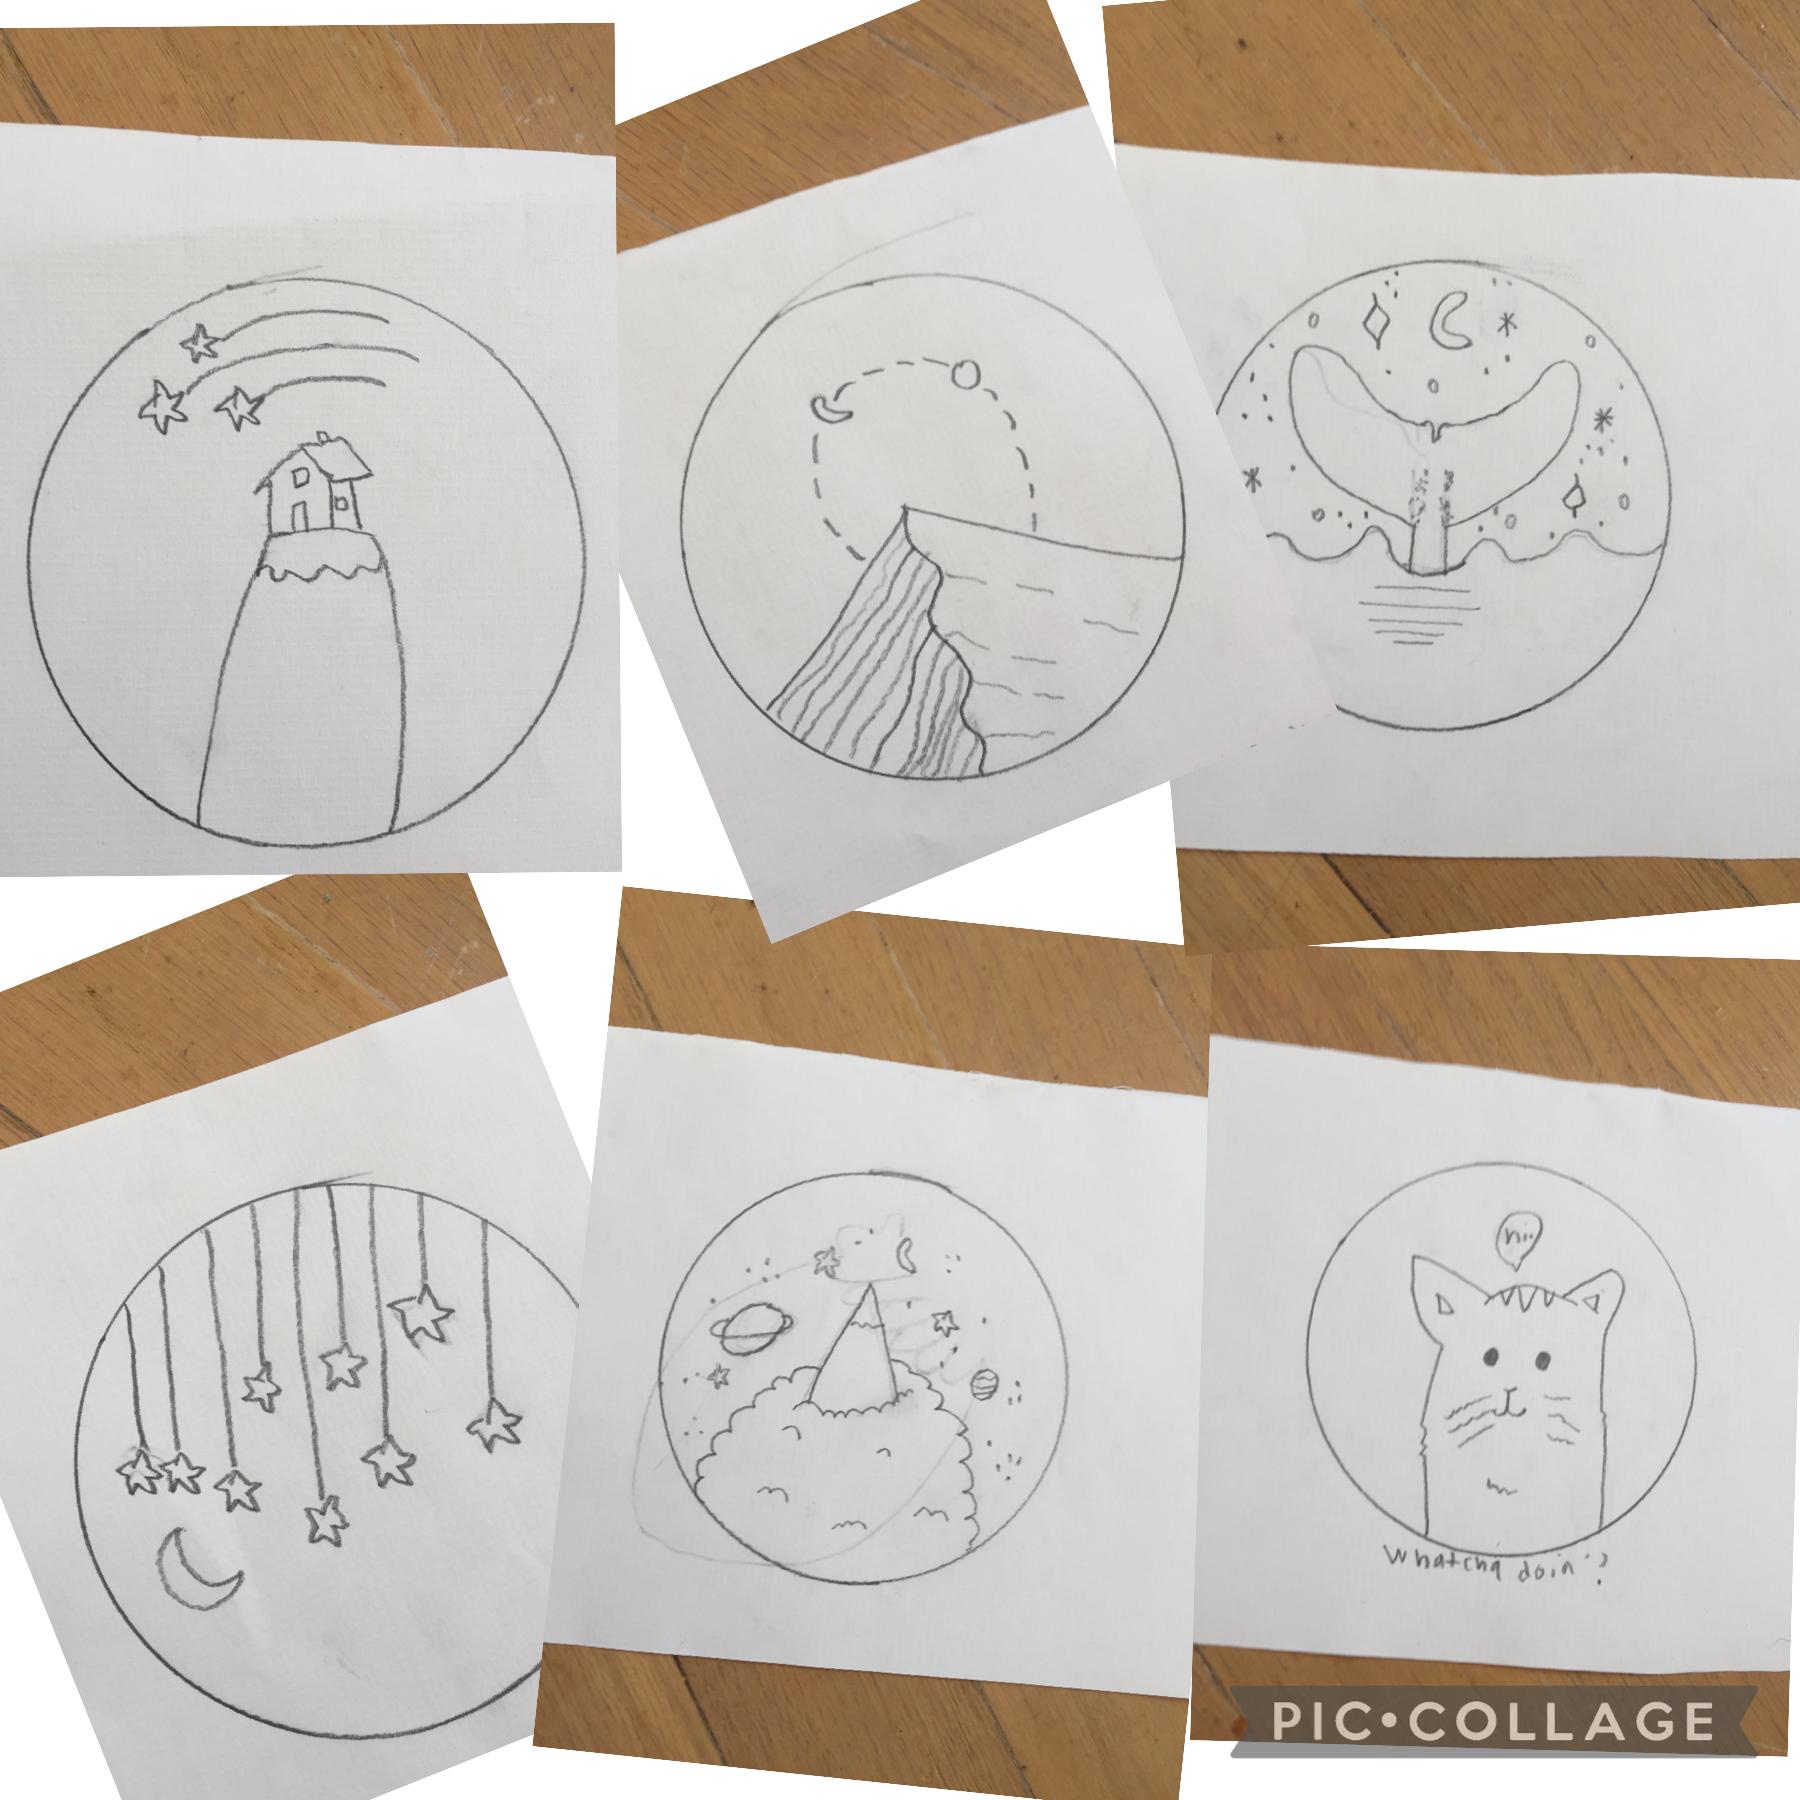 A collage of my circle drawings!